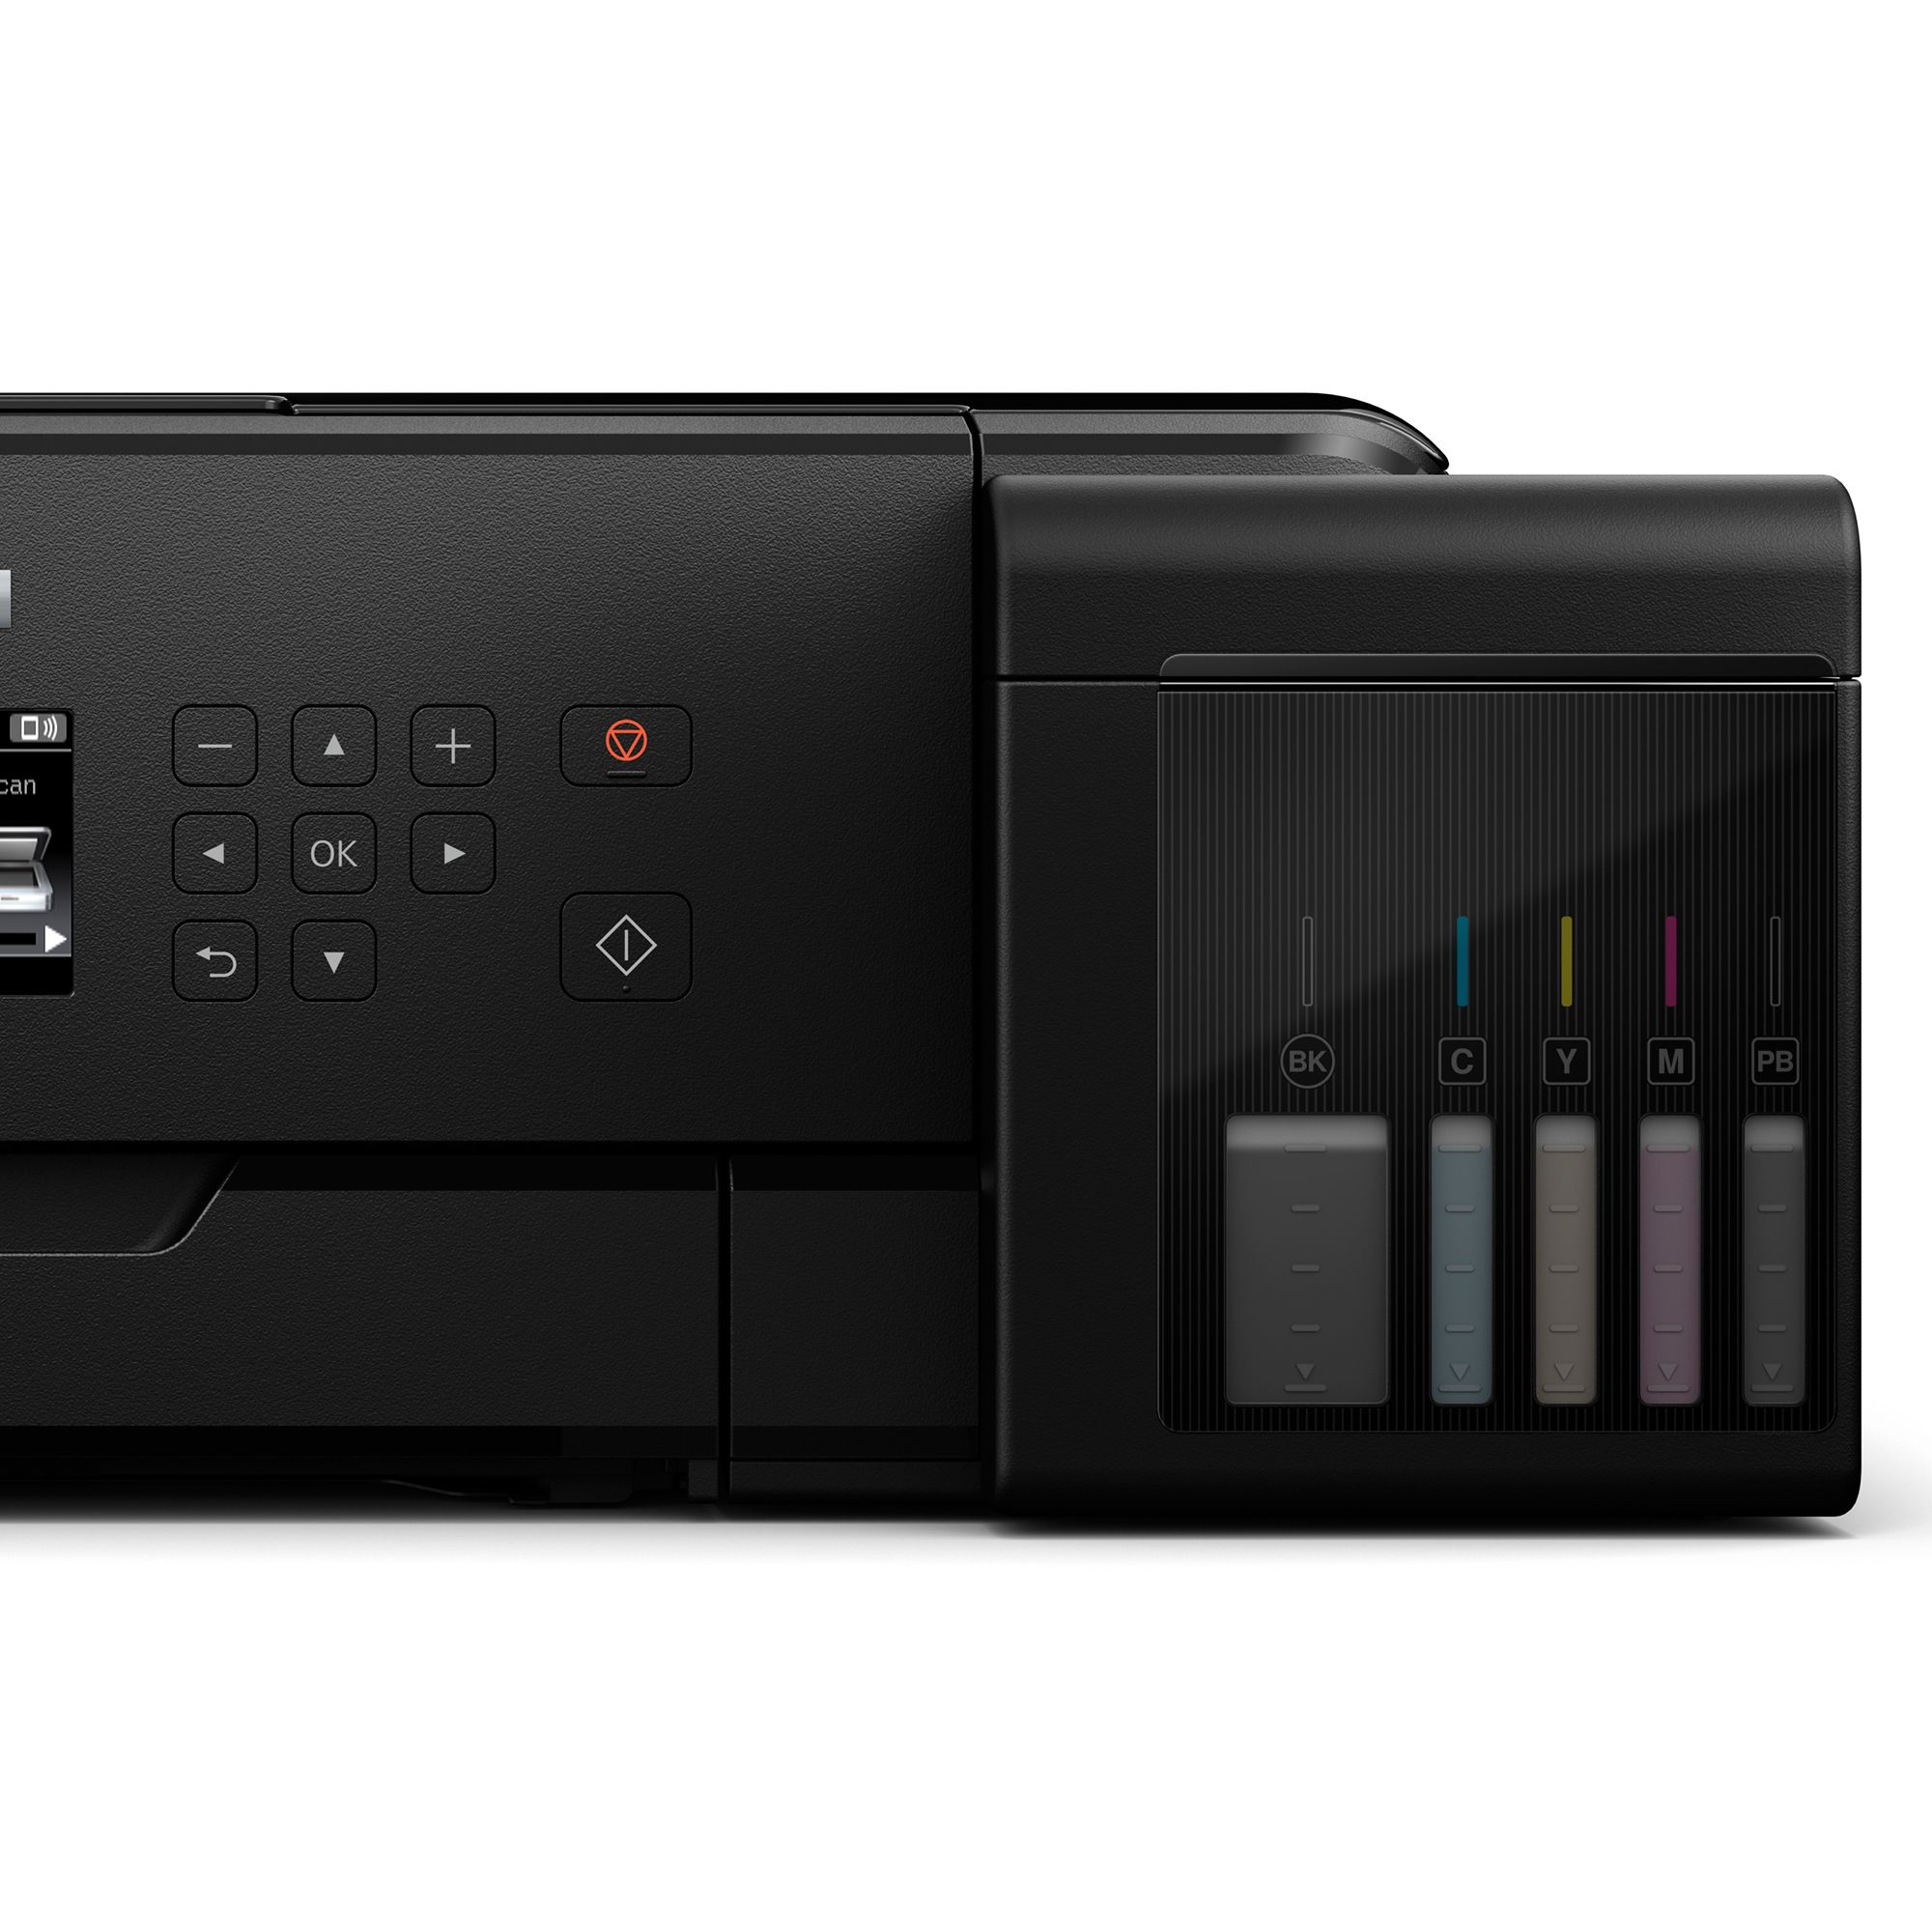 Epson Ecotank Et 7750 Three In One Wi Fi A3 Printer With High Capacity 2969